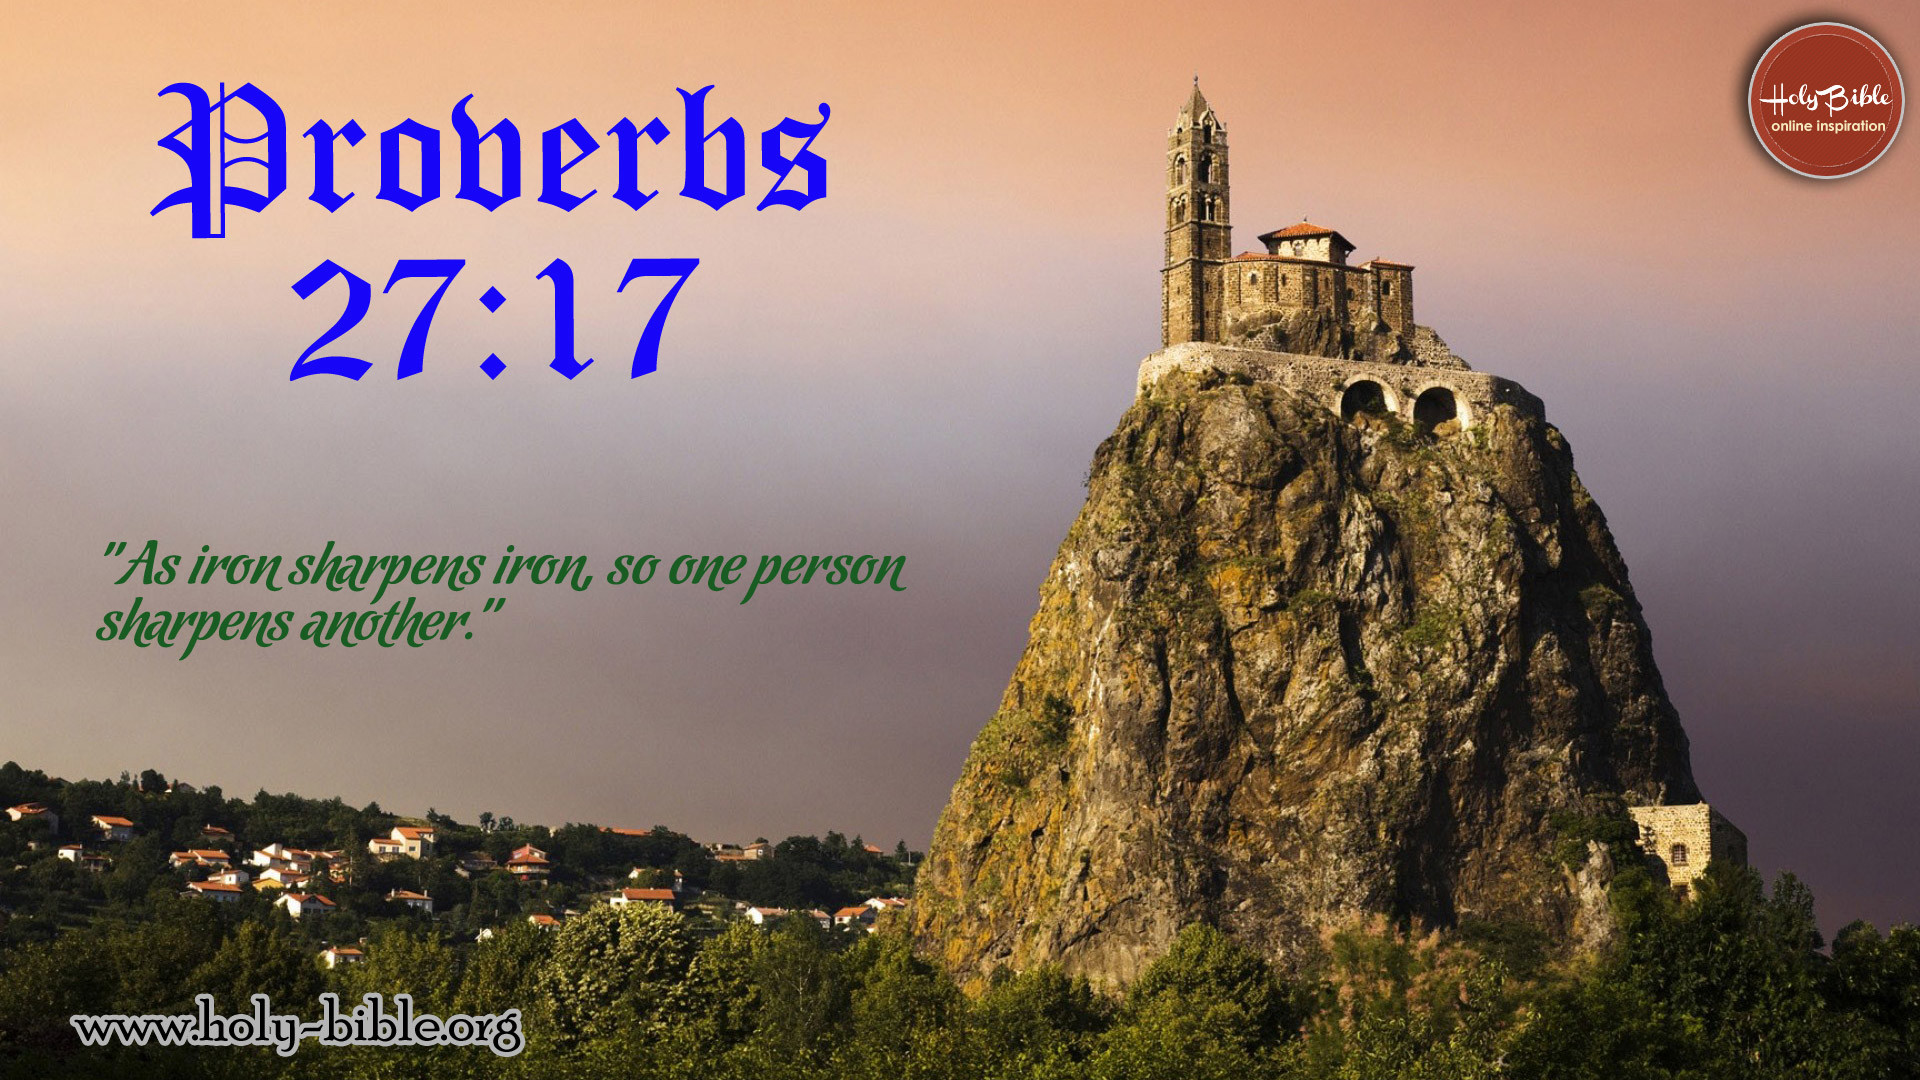 1920x1080 Bible Verse of the day Proverbs 2717 